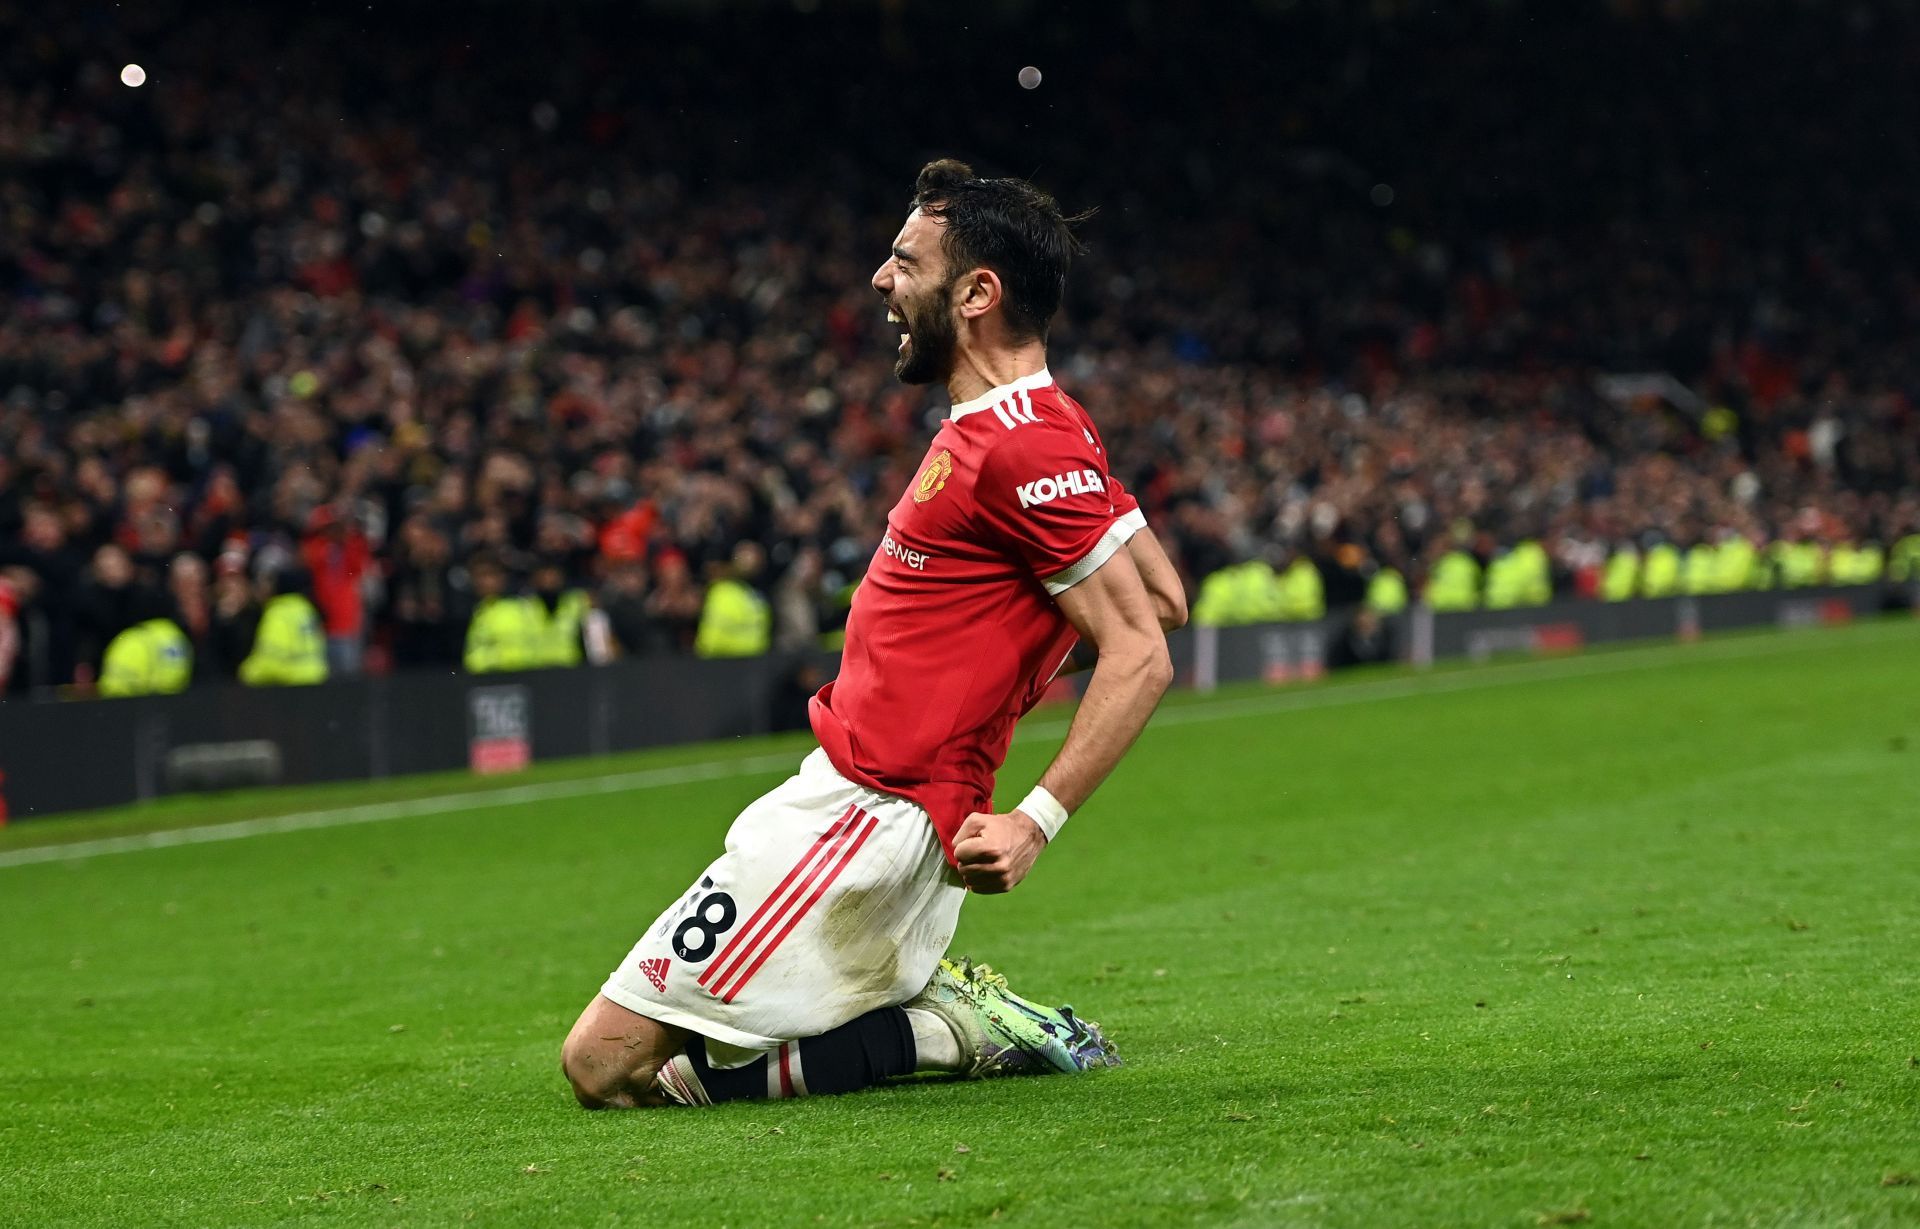 Bruno Fernandes scored for the Red Devils against Brighton last time out.